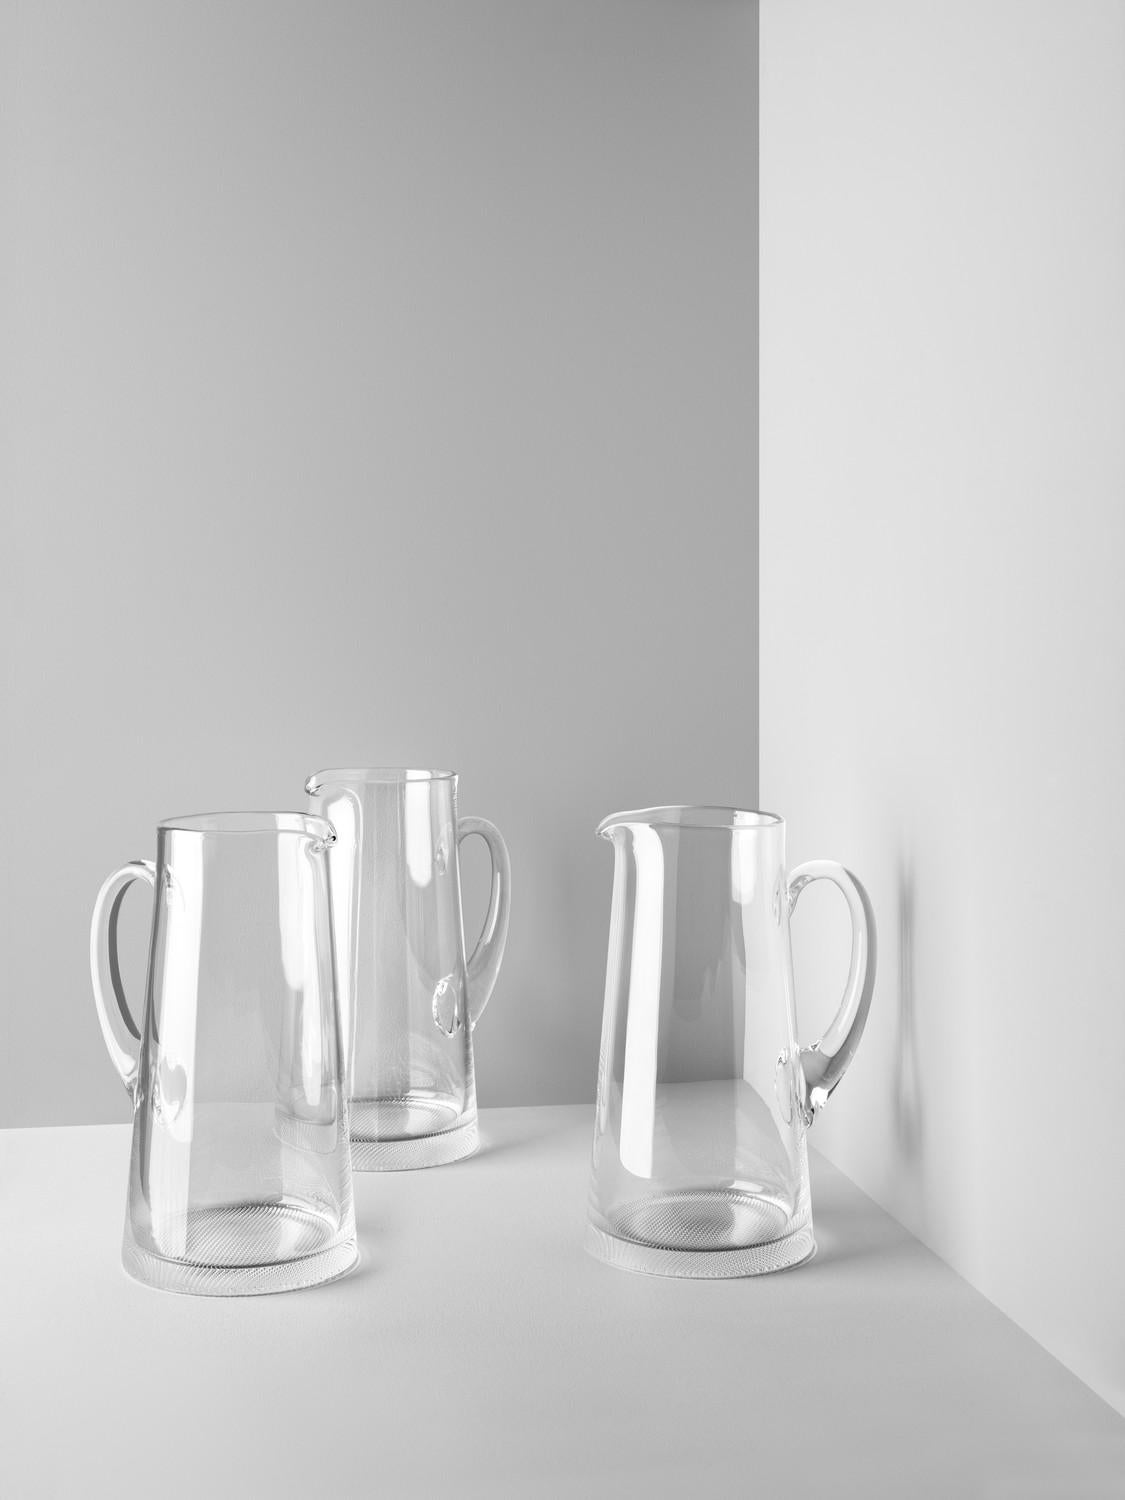 Like all the items in the Limelight collection, this pitcher has the distinctive, textured base that optically reflects light, and it's even handmade. All the pieces in the collection from Kosta Boda are perfect for a beautifully set table any day